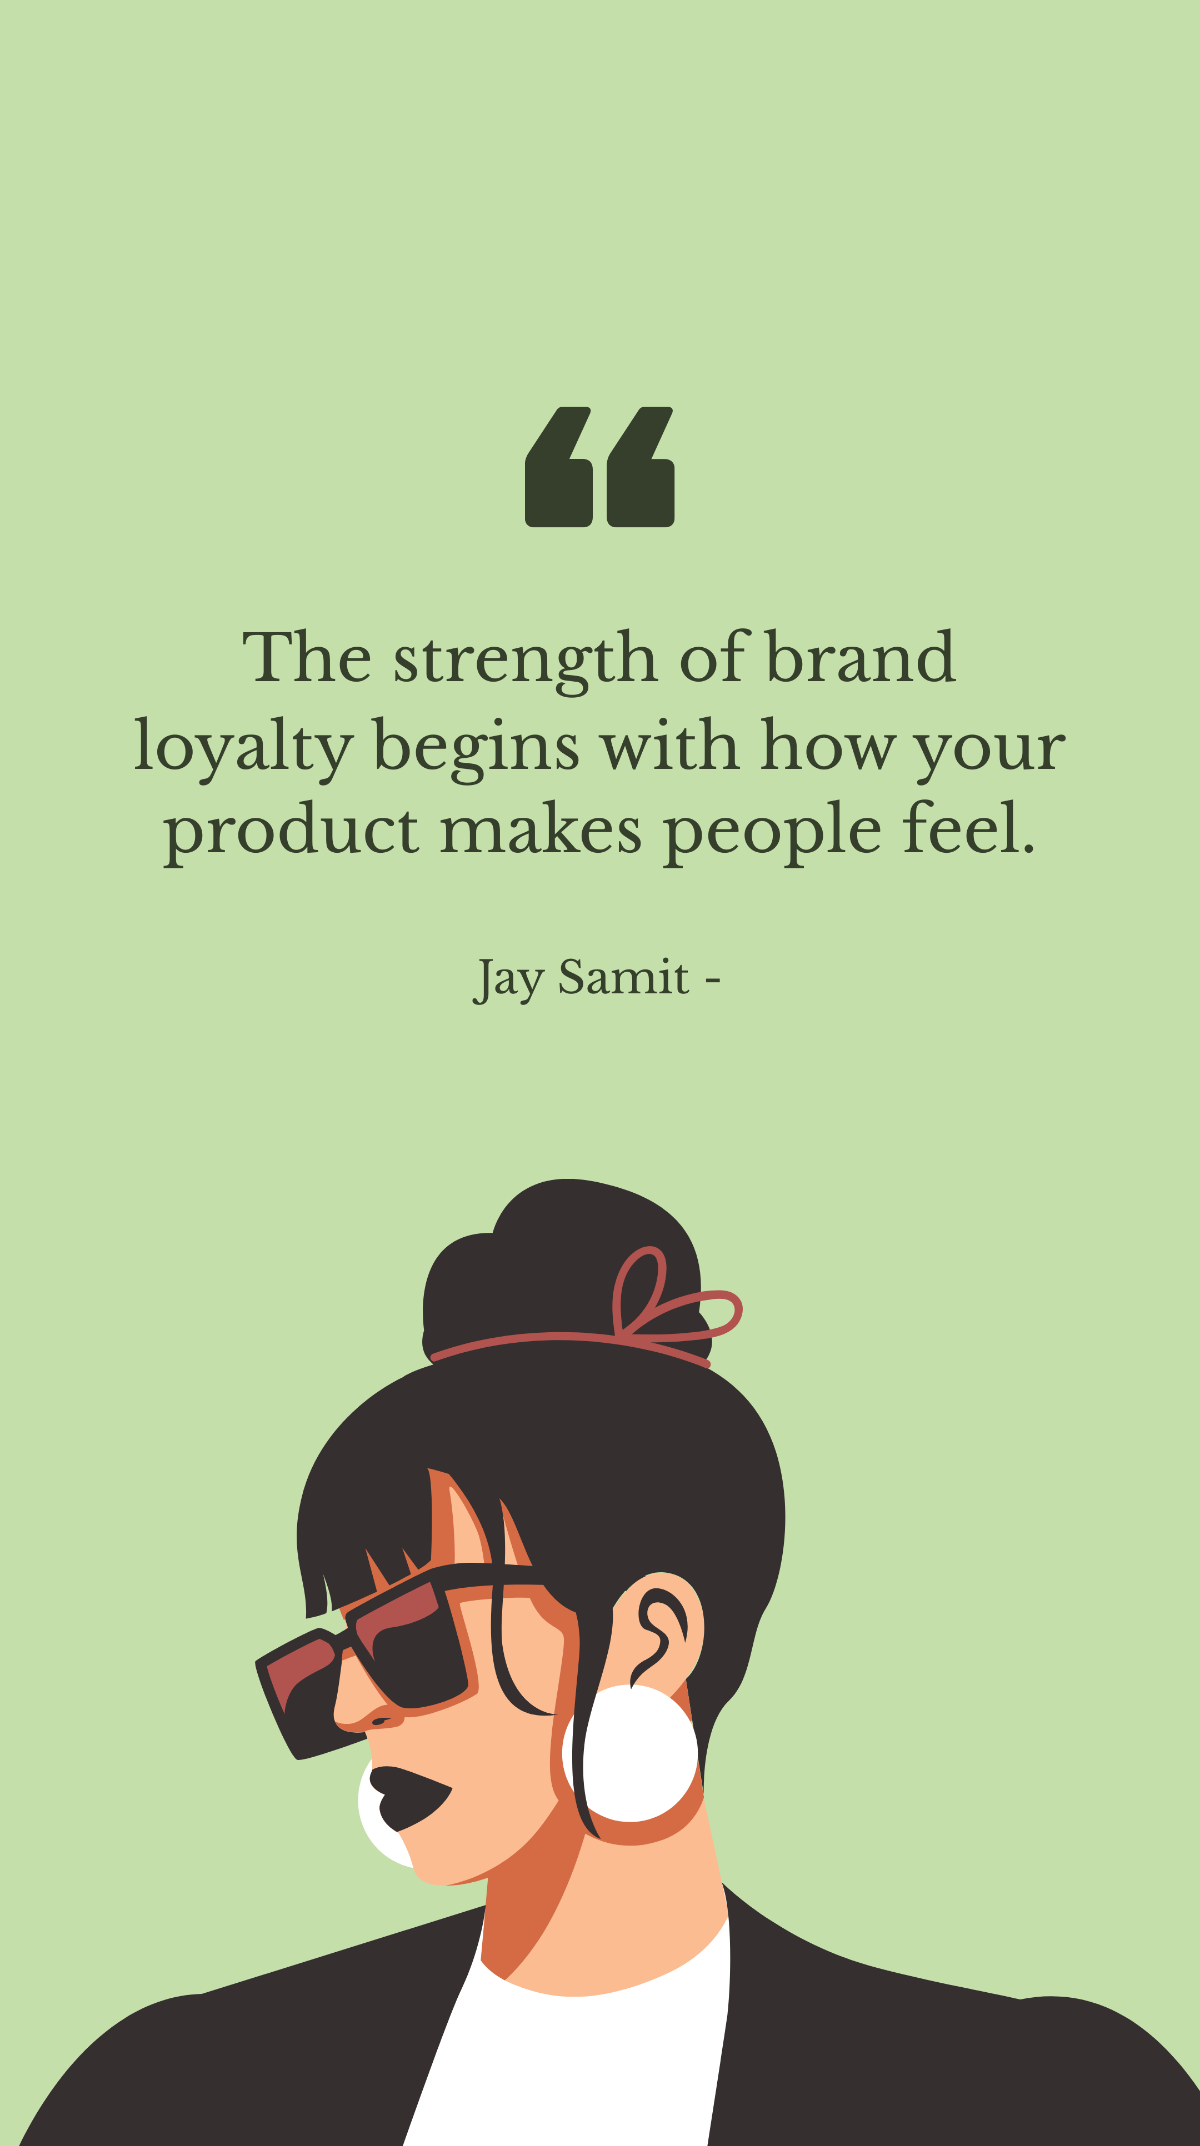 Jay Samit - The strength of brand loyalty begins with how your product makes people feel. Template